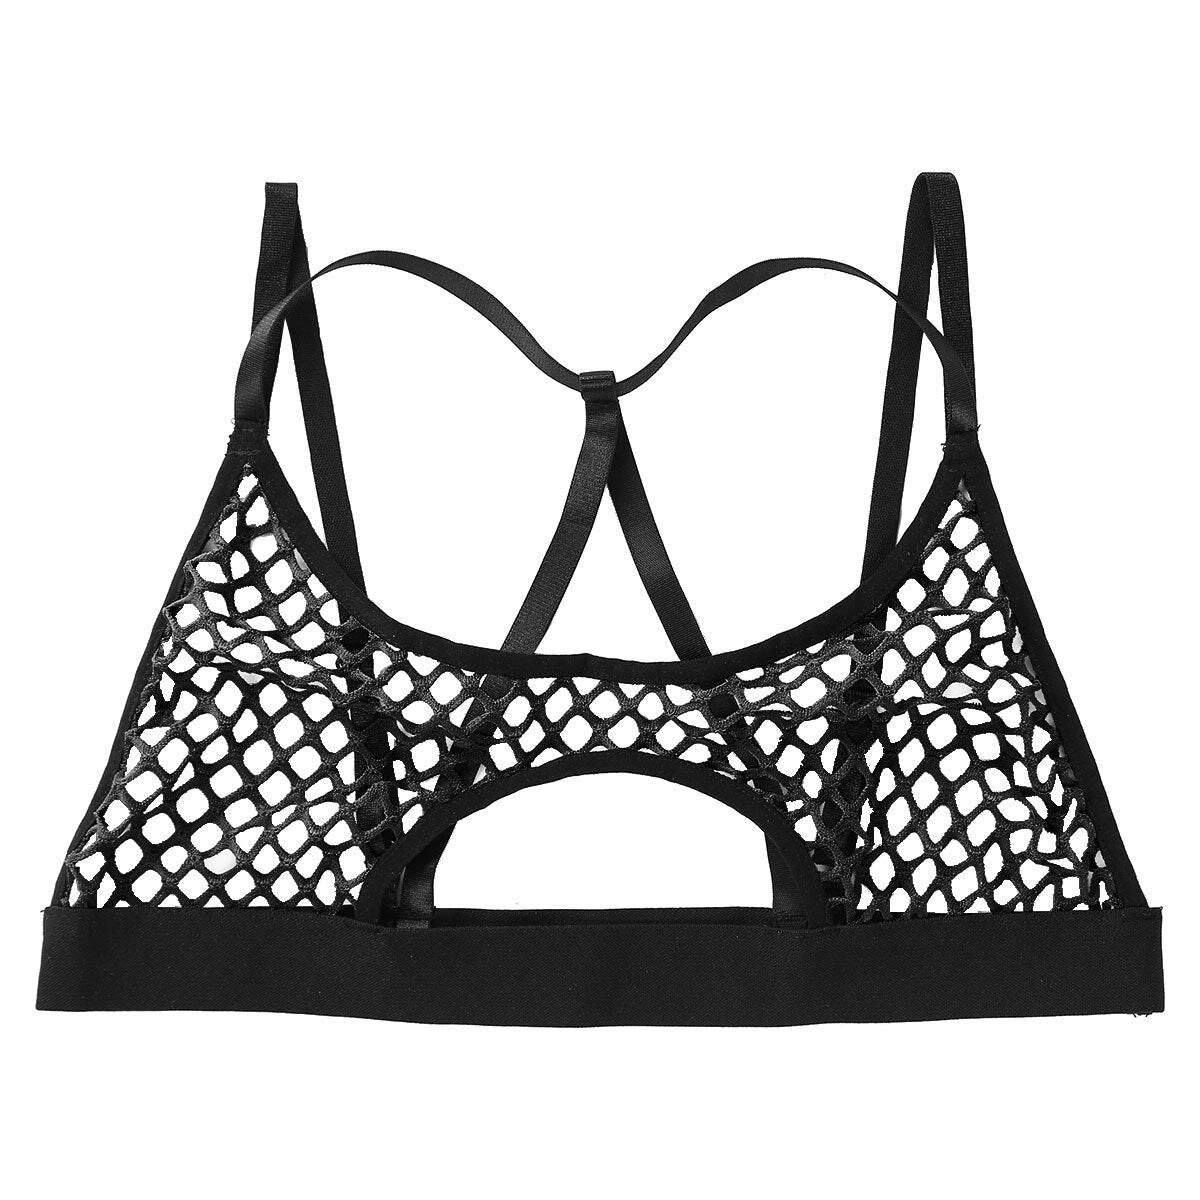 Rags n Rituals 'Unborn' Fishnet Top at $19.99 USD